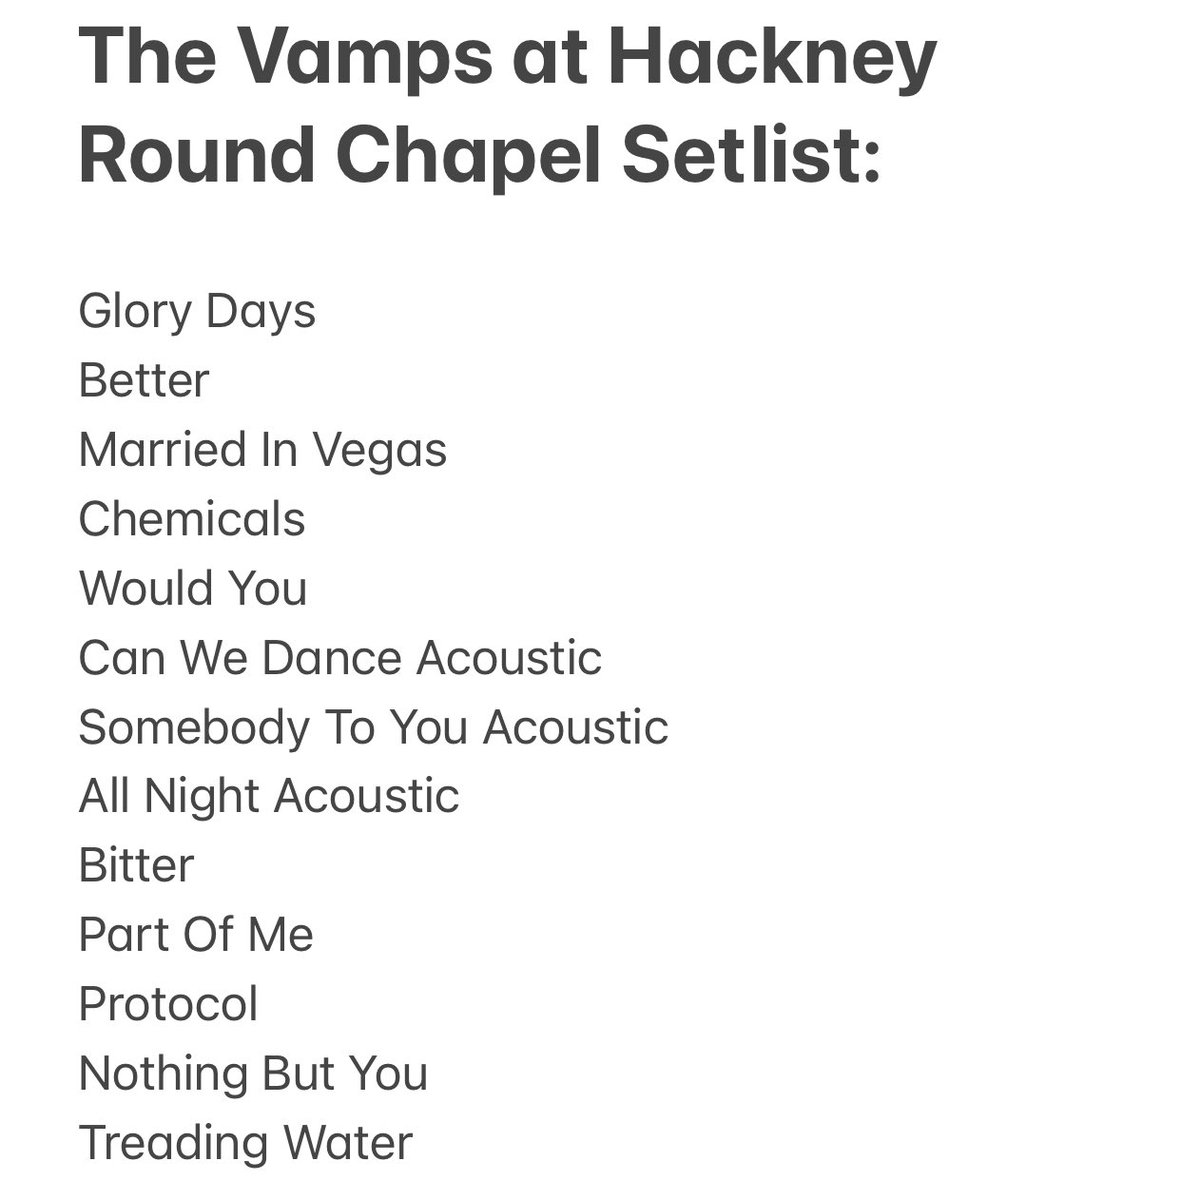 The Vamps setlist for Hackney Round Chapel #TheVampsGlobalConcert